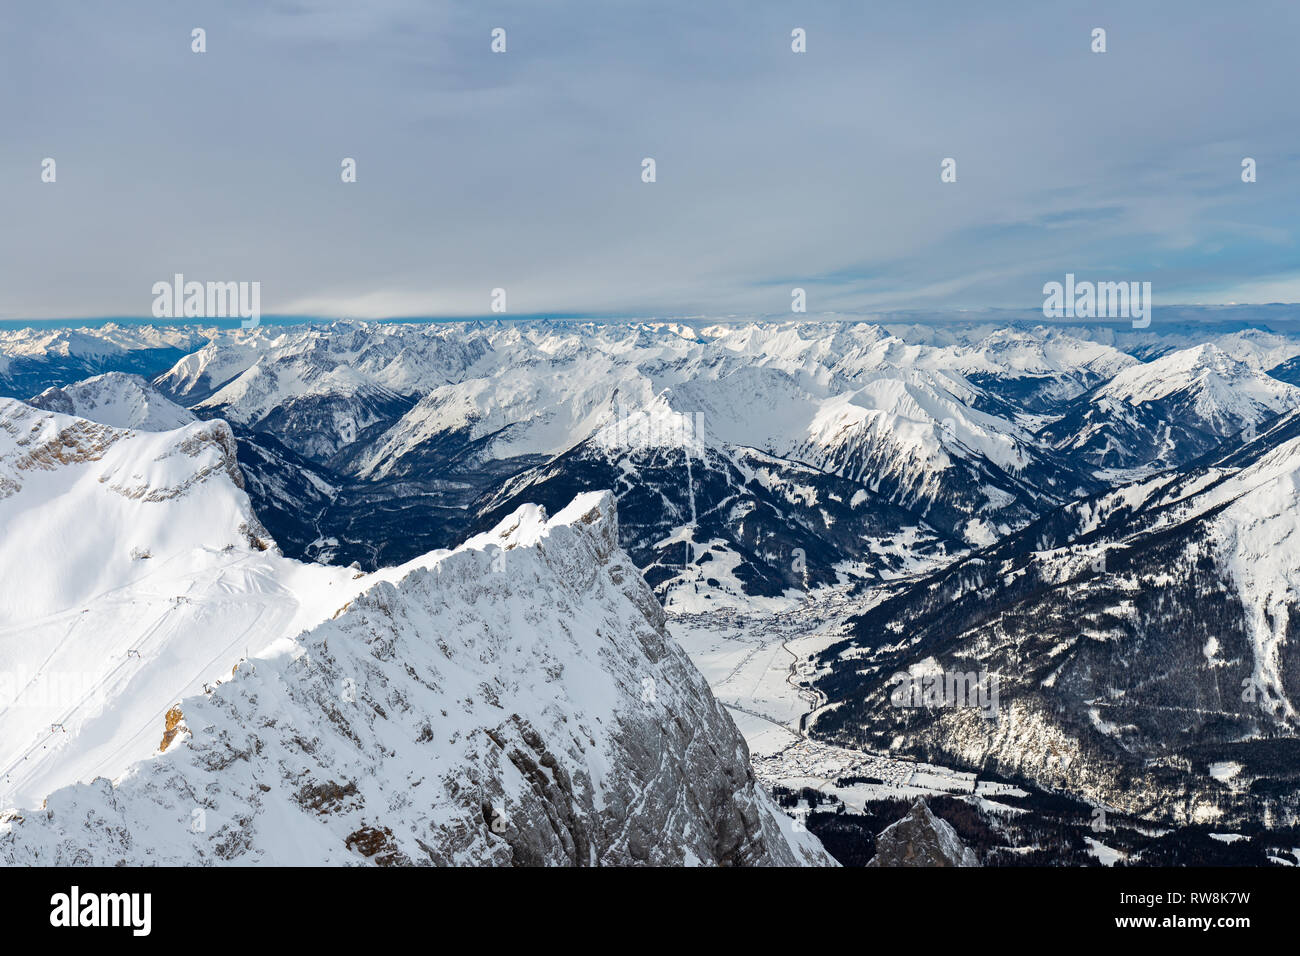 View from summit of Zugspitze mountain to Ehrwald, Tyrol Stock Photo